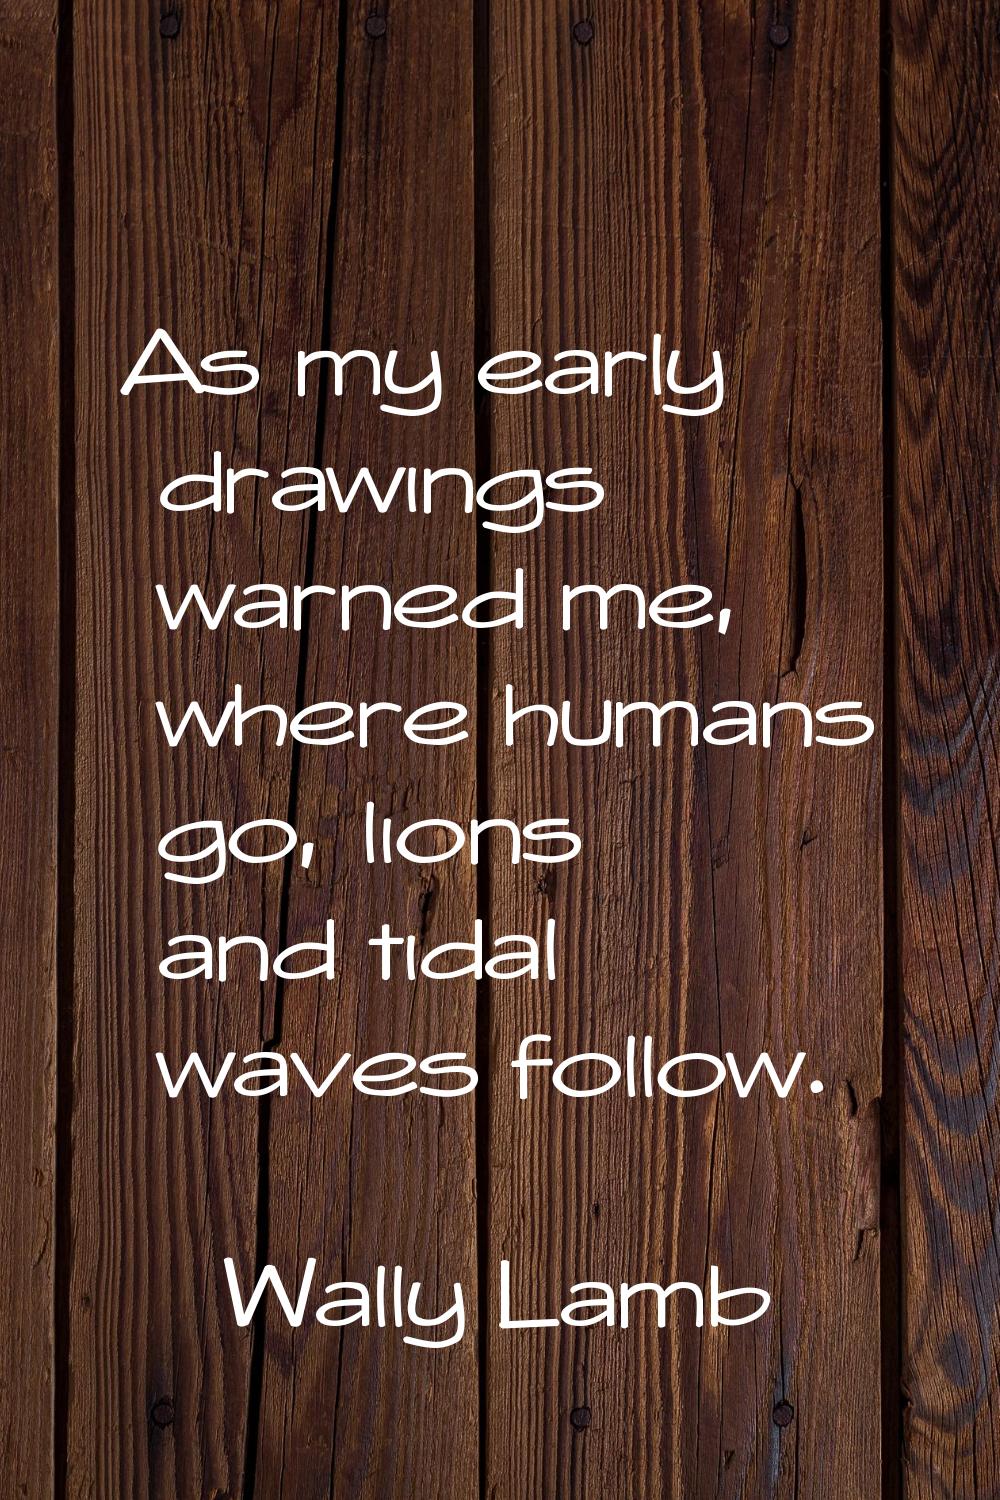 As my early drawings warned me, where humans go, lions and tidal waves follow.